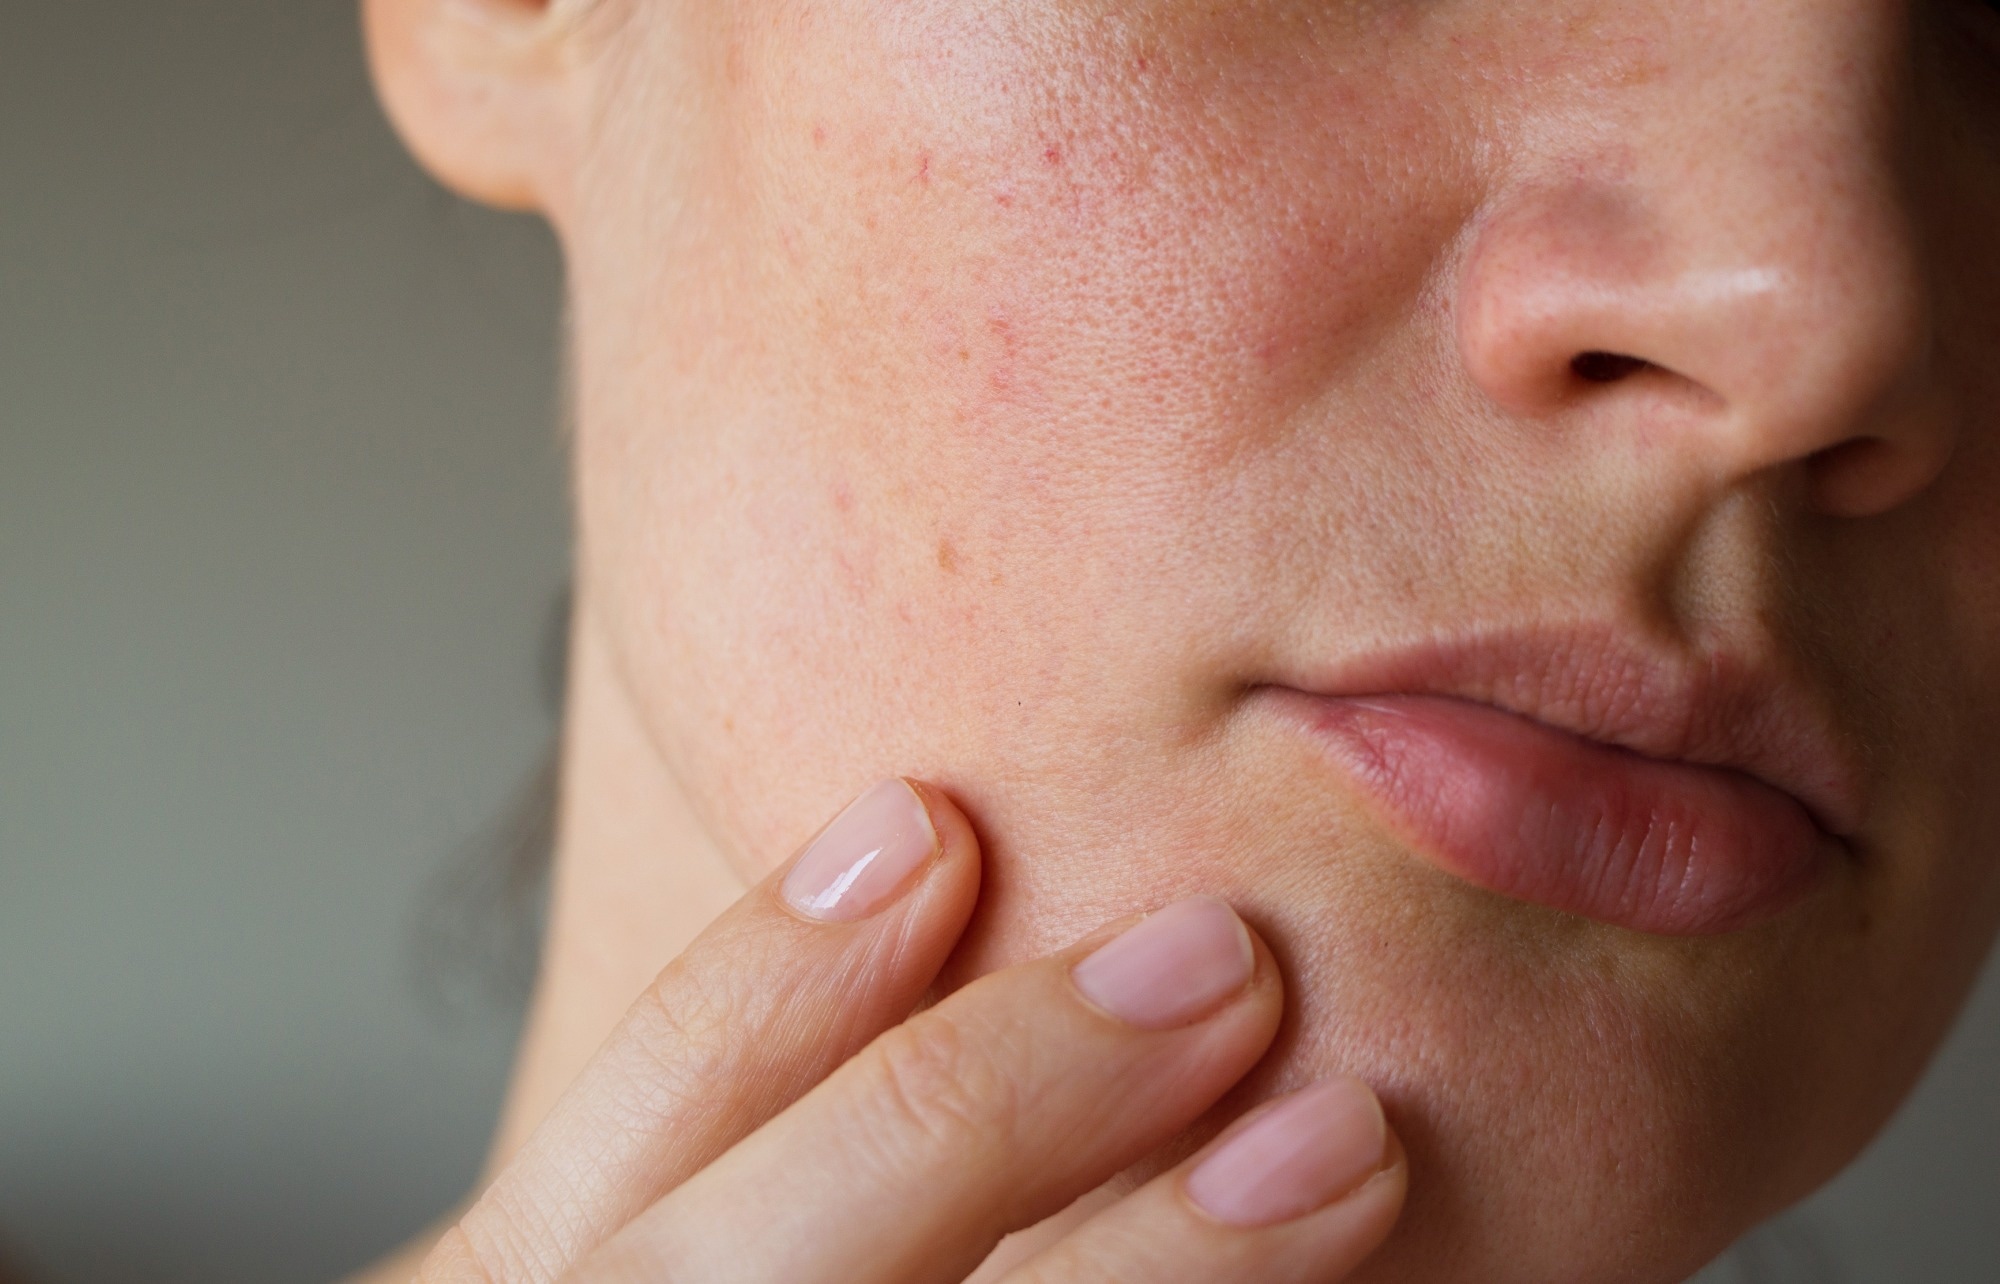 Study: Effects of psychological stress on the emission of volatile organic compounds from the skin. Image Credit: Geinz Angelina/Shutterstock.com